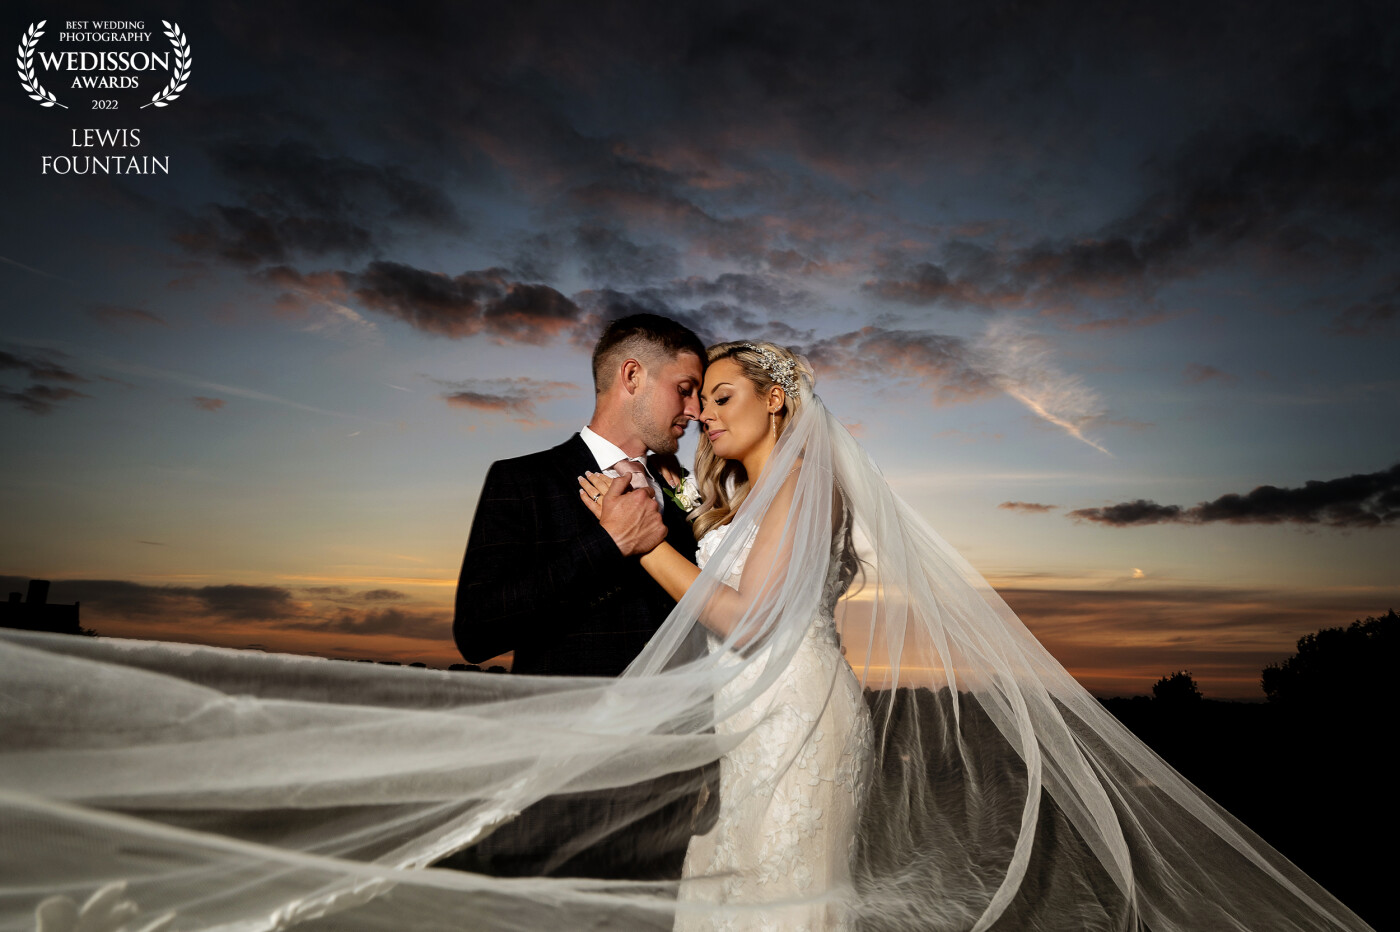 Another stunning sunset over Ely, and with a bride and groom as in love as this pair, who wouldn’t have whisked them off to get this perfect veil shot